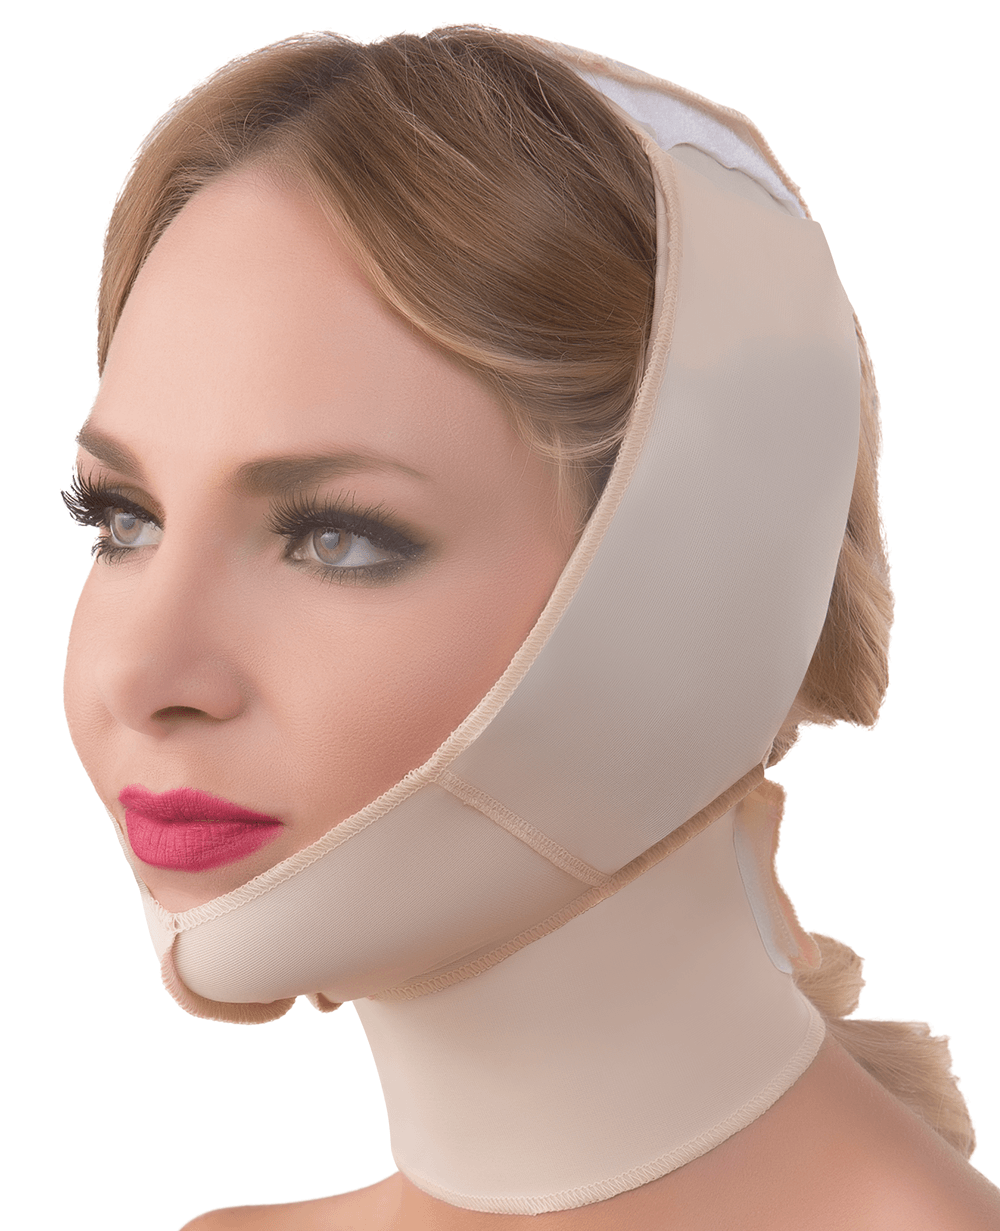 Chin Strap Support with Cold Pack Insert Pouches Compression Garment with Full Neck Support (FA04) - Isavela Compression Garments